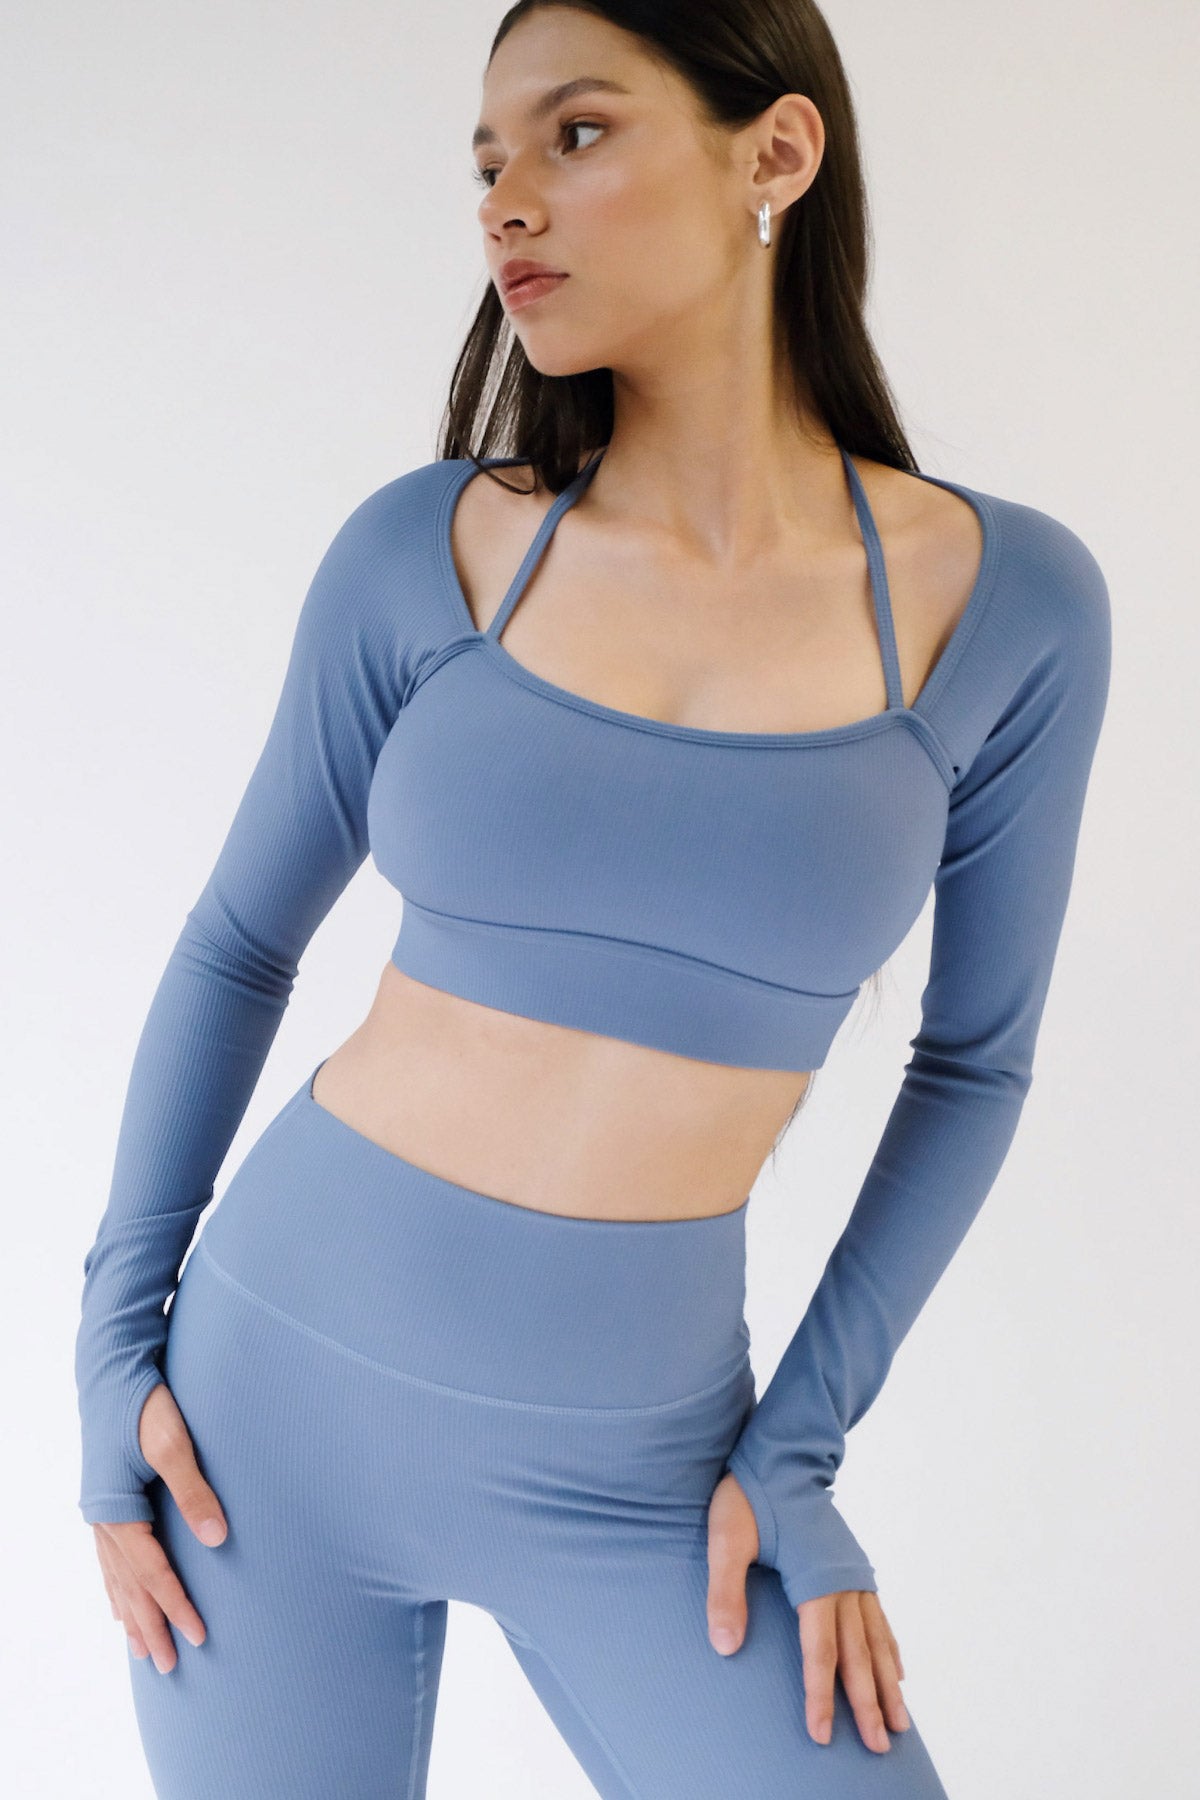 Flair Long Sleeve Crop Top in Blue (1L LEFT)